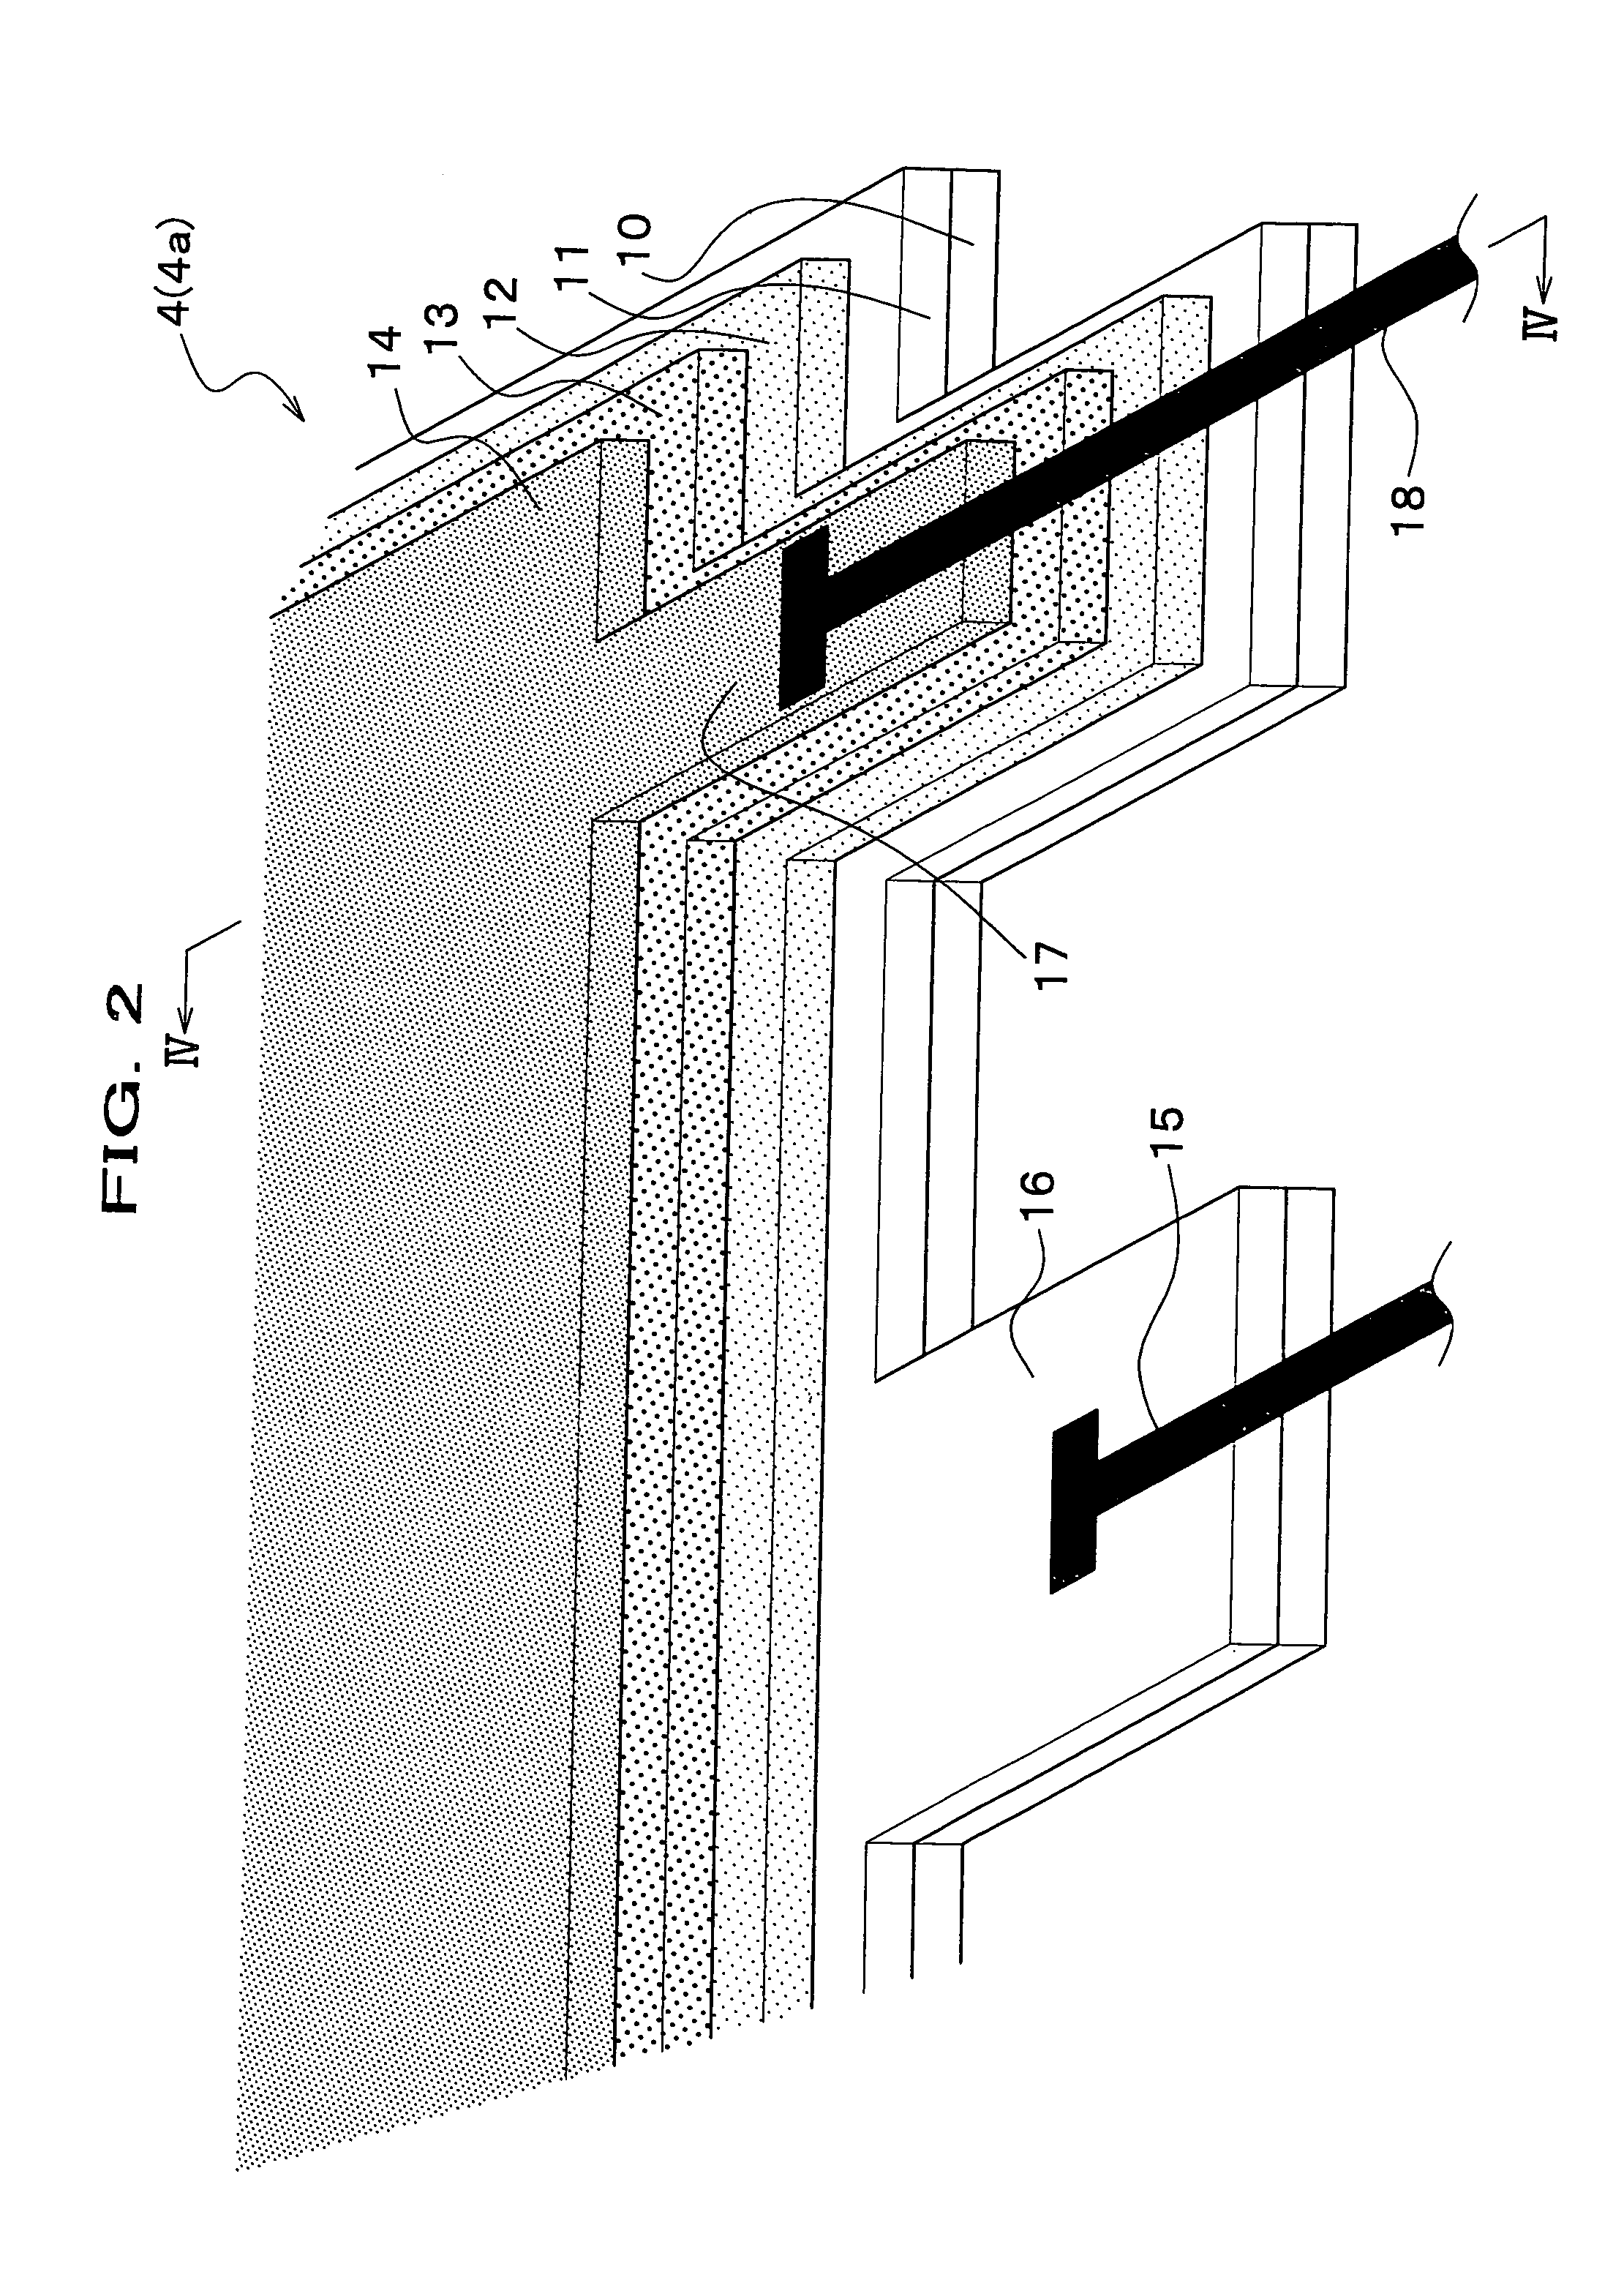 Sunroof panel apparatus for a vehicle